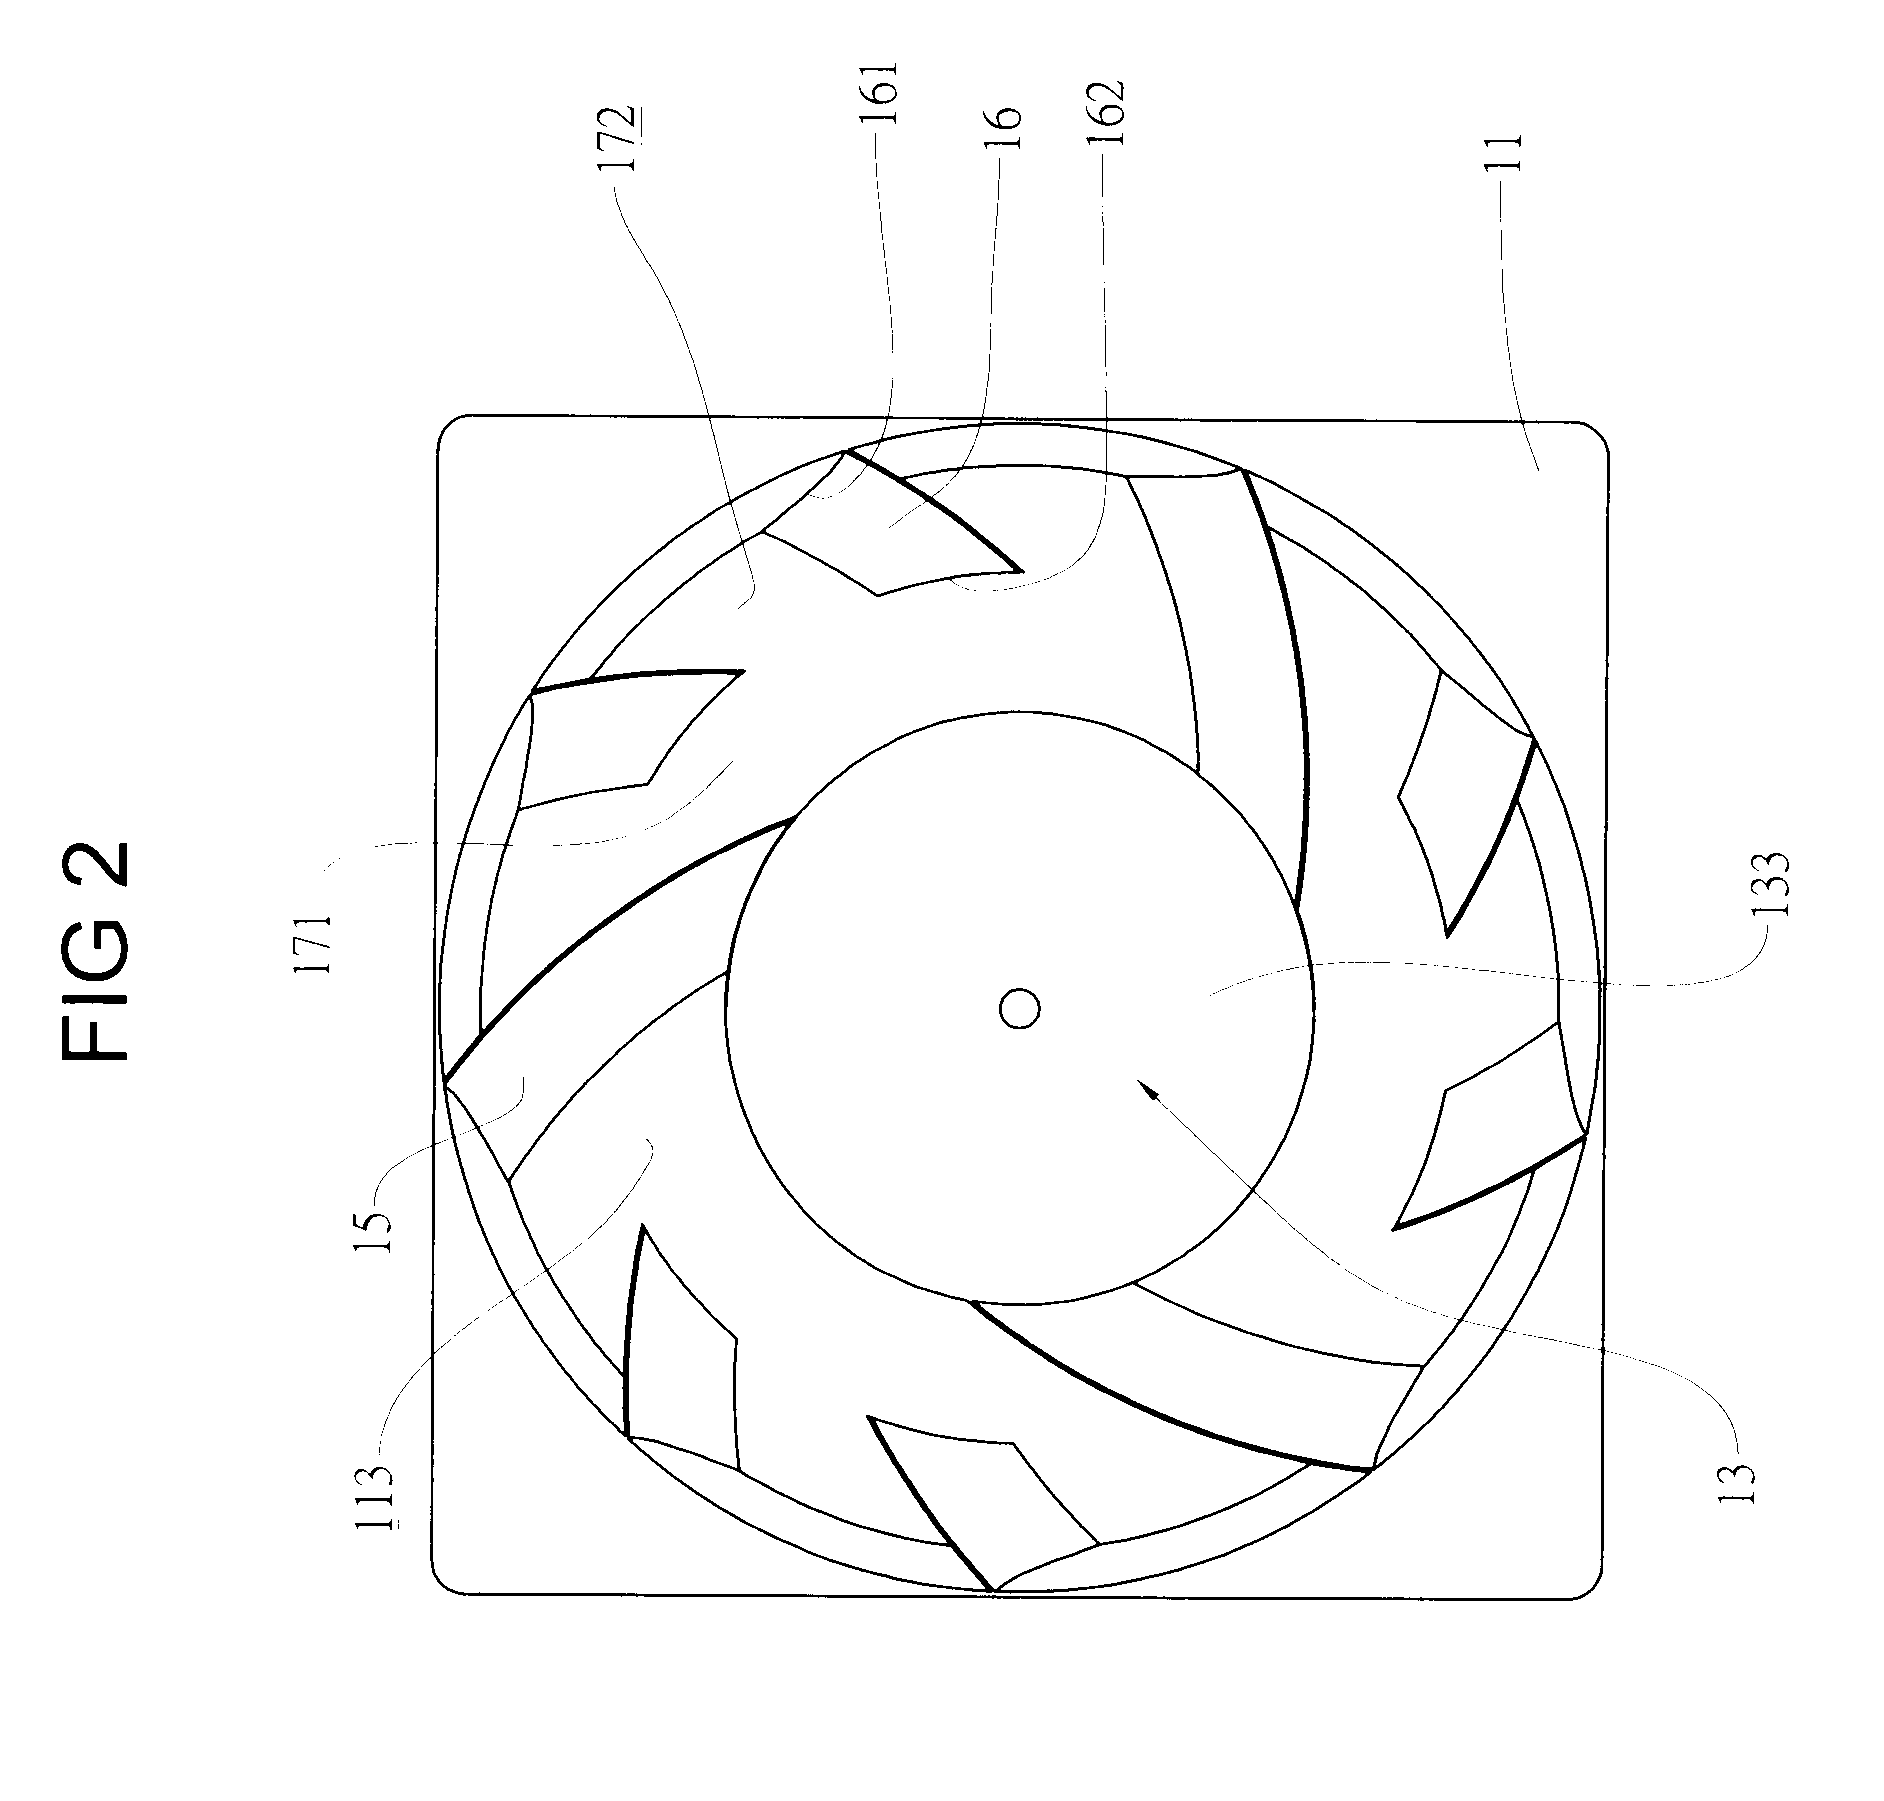 Fan device capable of increasing air pressure and air supply